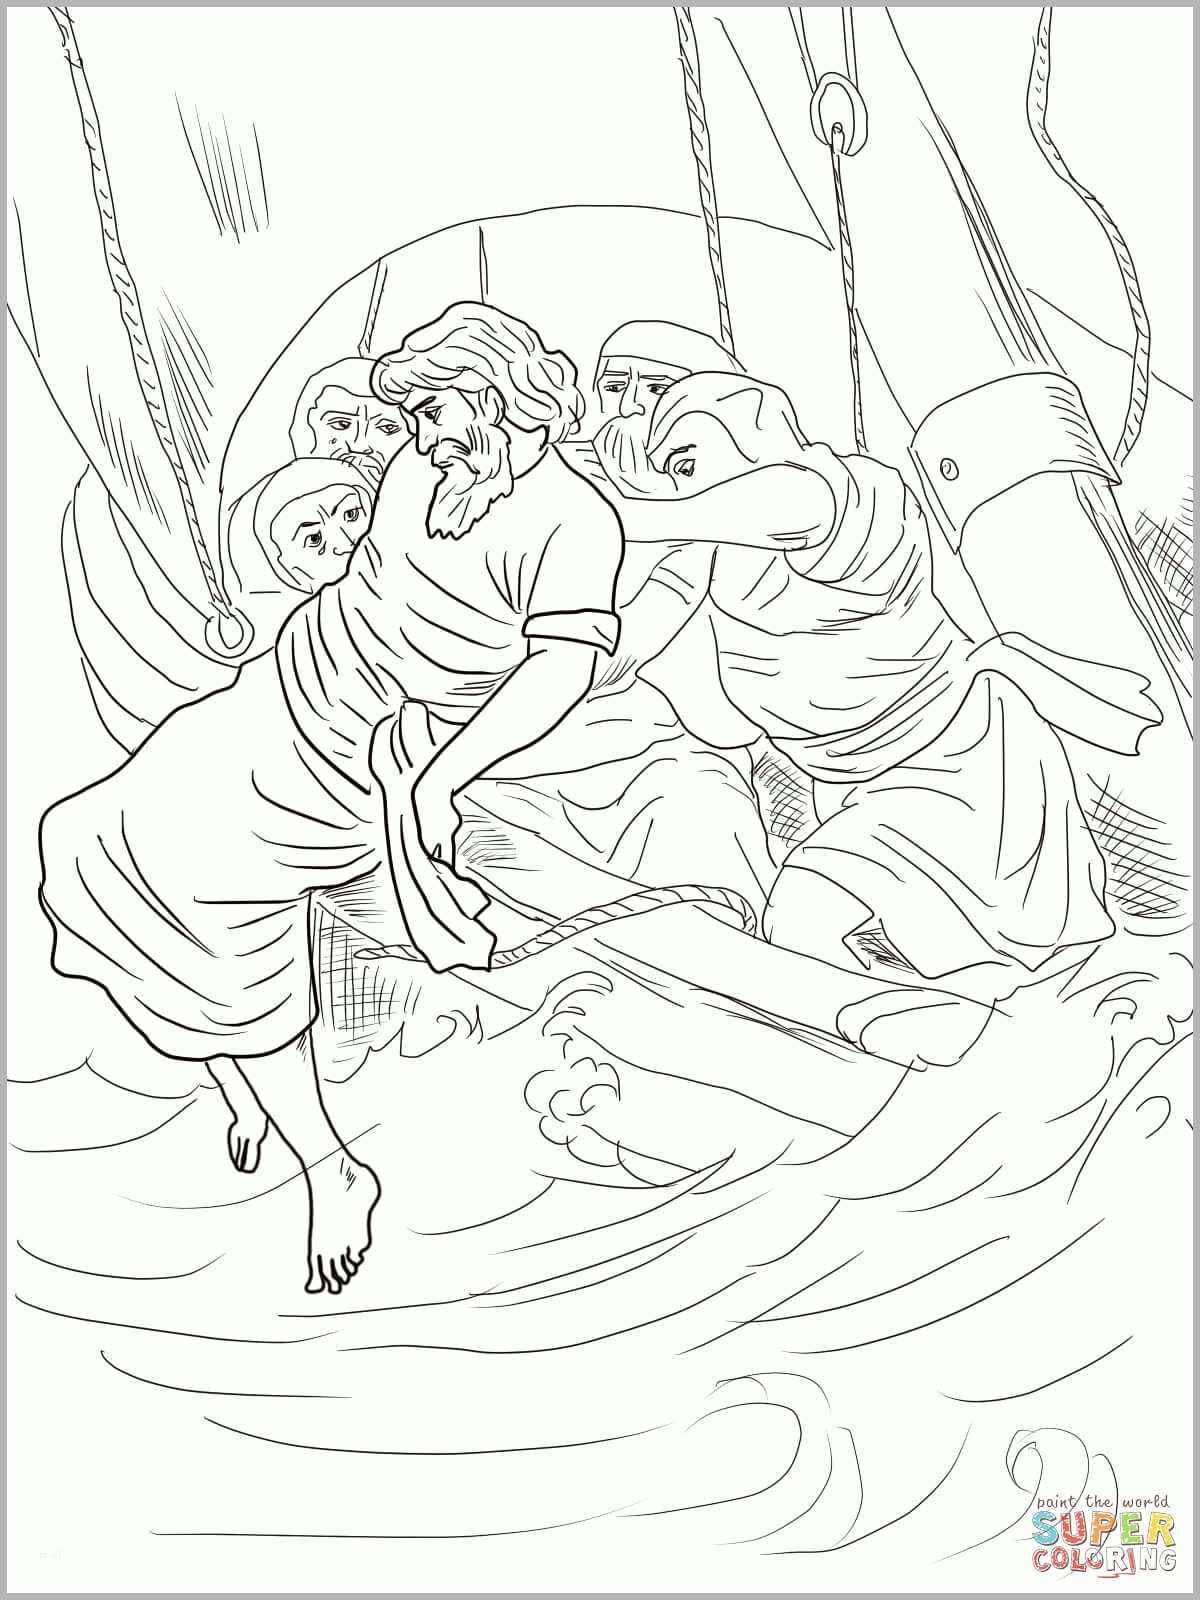 Exklusiv Jona Im Wal Ausmalbilder Jonah In the Whale Coloring Pages